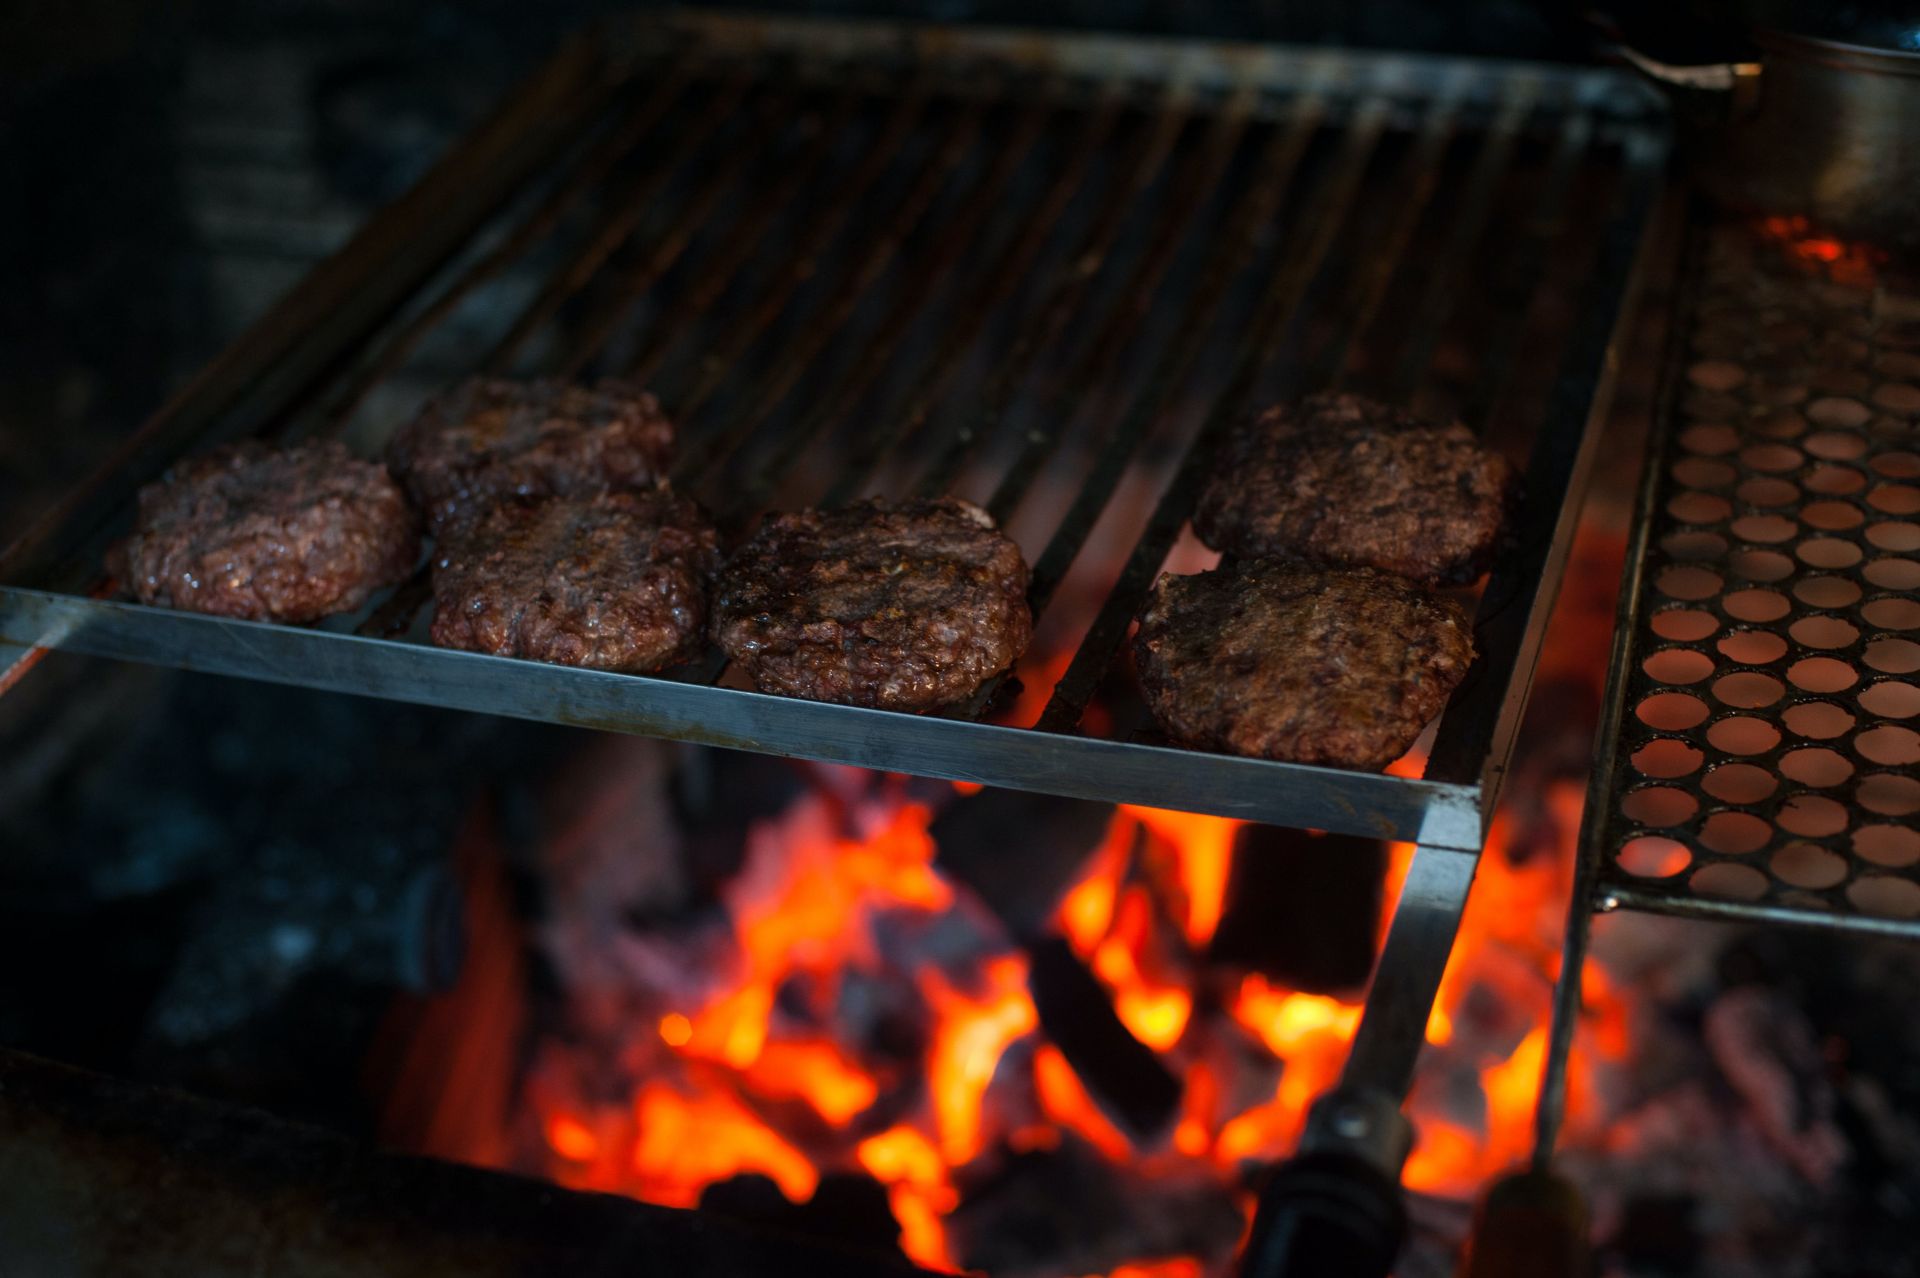 From above of appetizing meat patties grilling on metal barbecue grade above fire in kitchen